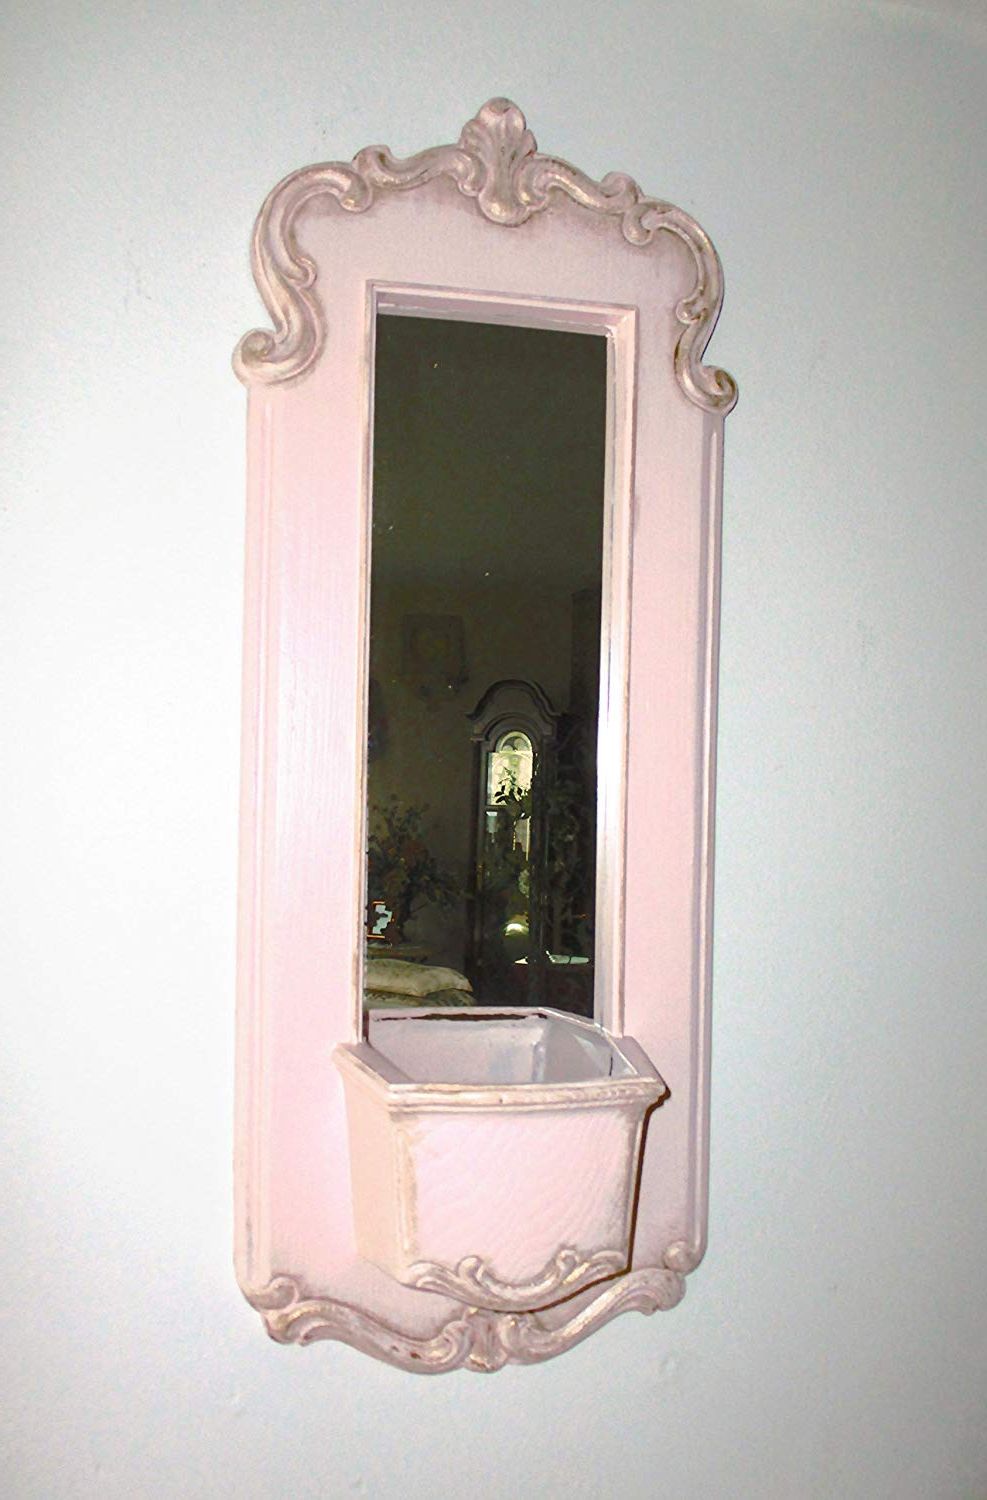 Girls Pink Wall Mirrors Inside Best And Newest Amazon: Wall Mirror With Pocket, Upcycled Vintage, Distressed (View 11 of 20)